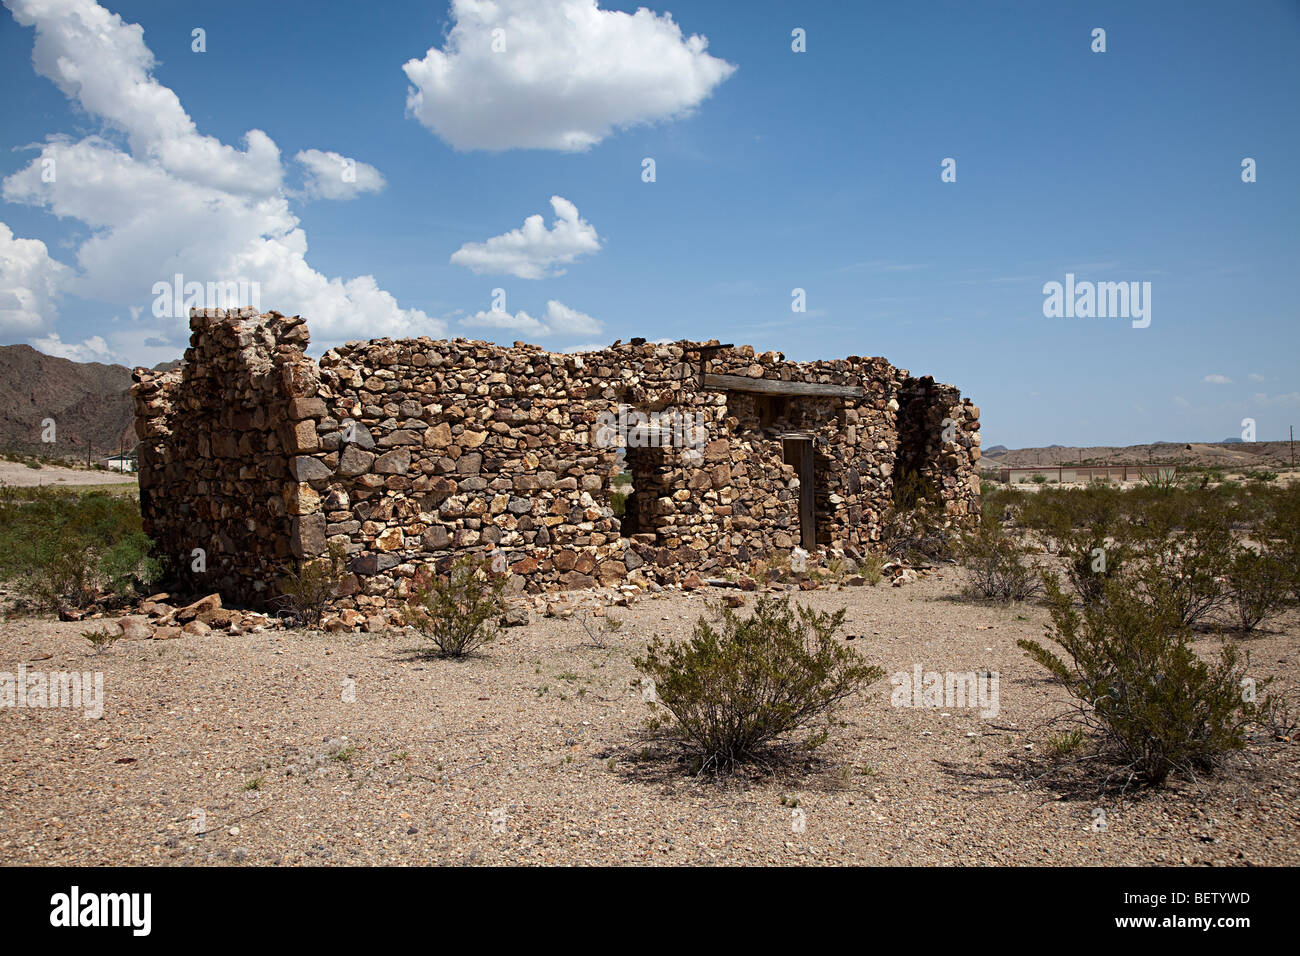 Ruined homestead in desert town of Study Butte Texas USA Stock Photo